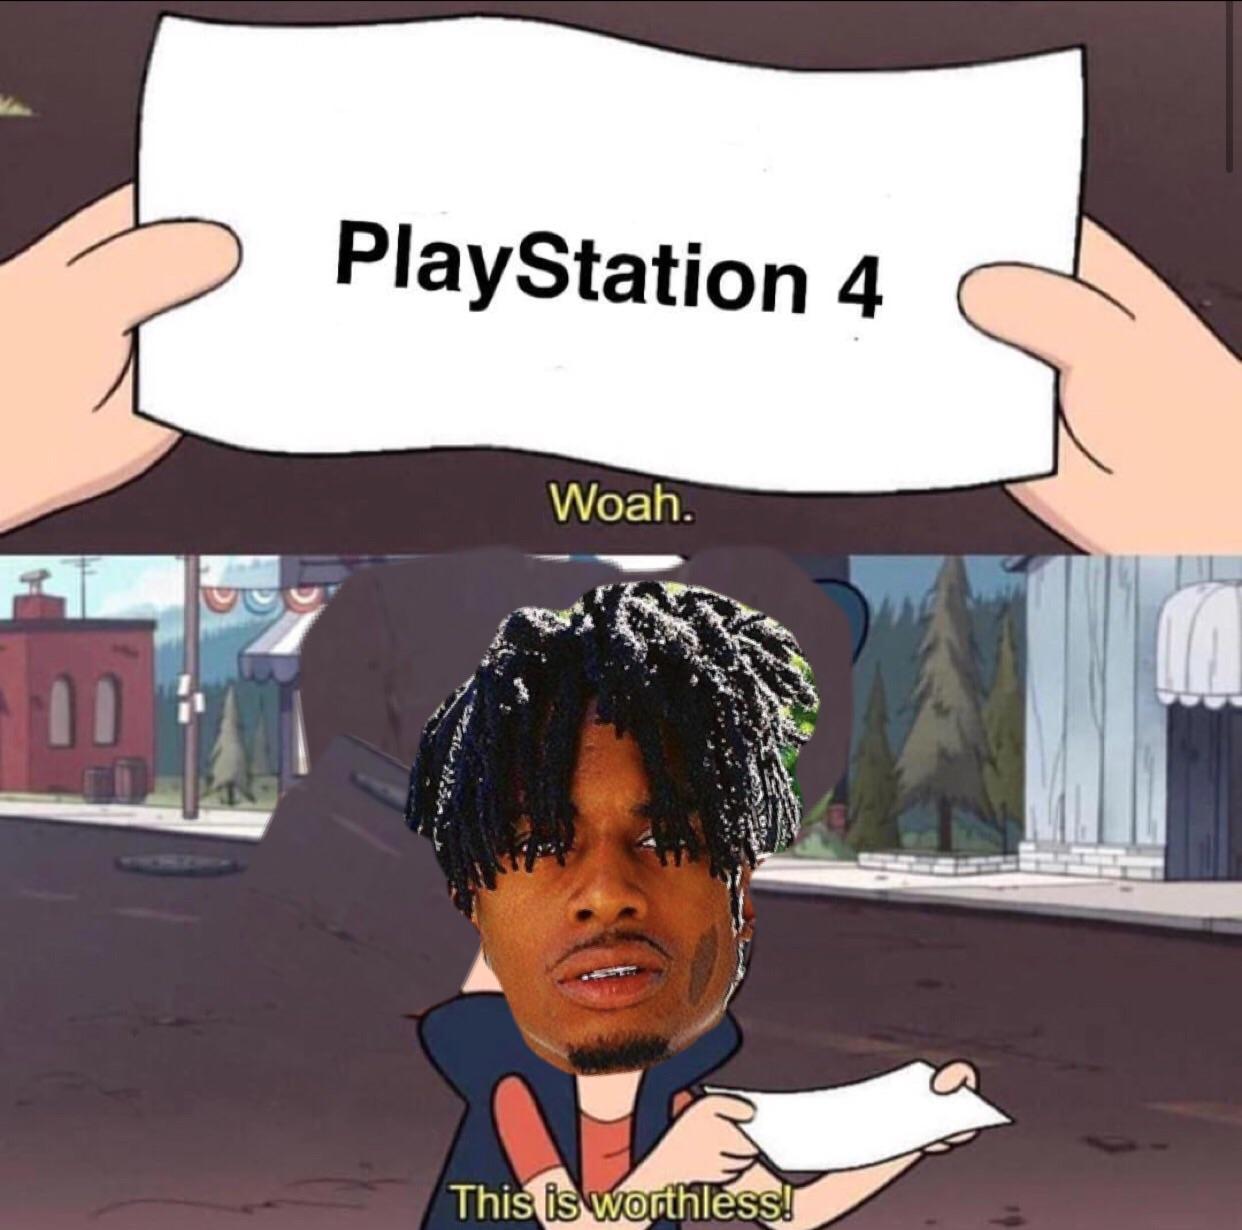 Even tho Carti likes PS4